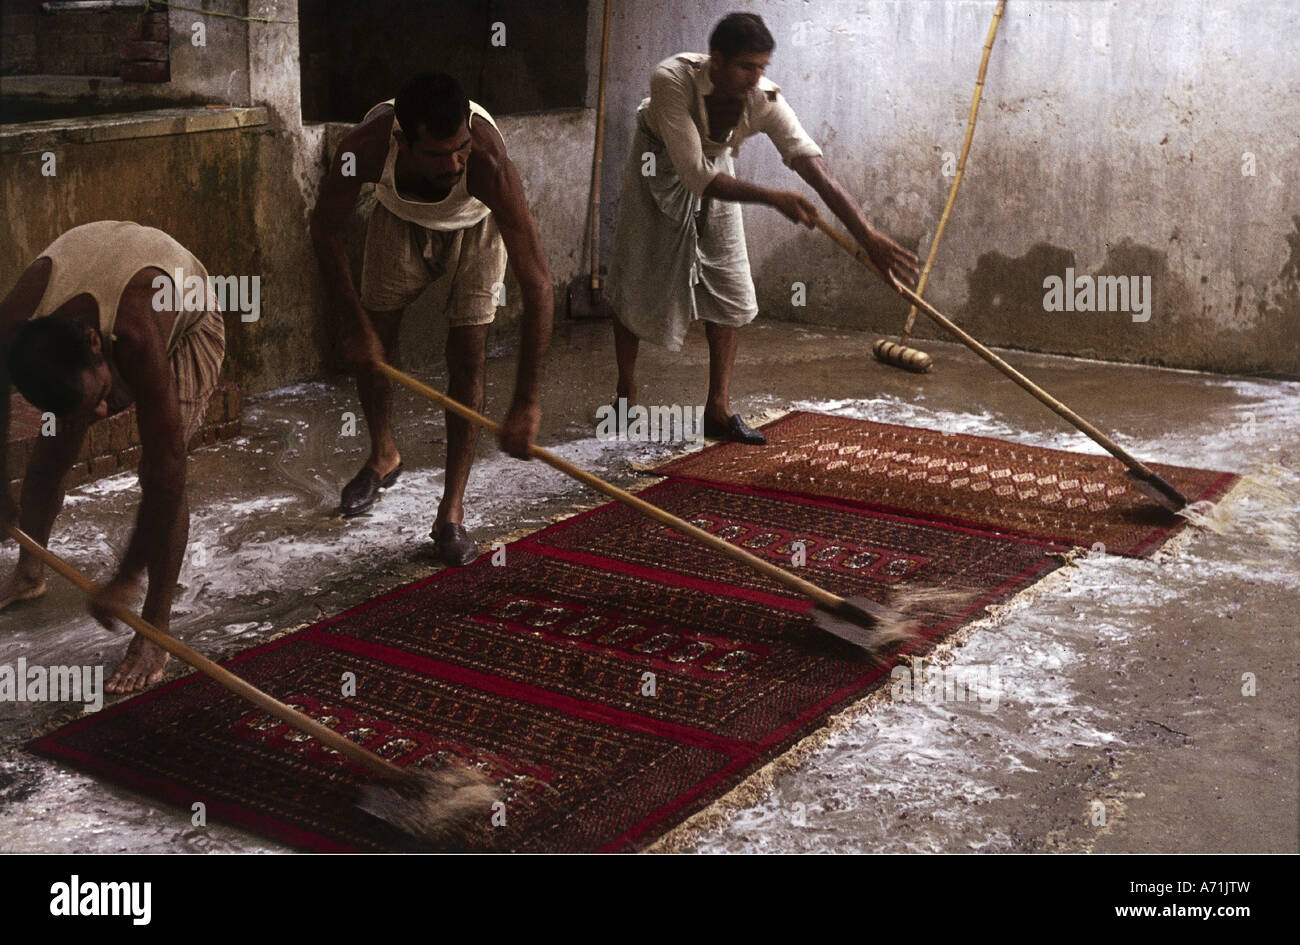 people, profession, Pakistan, worker cleaning carpets, job, knot, rug, production, oriental, work, handcraft, craft, knotting, c Stock Photo